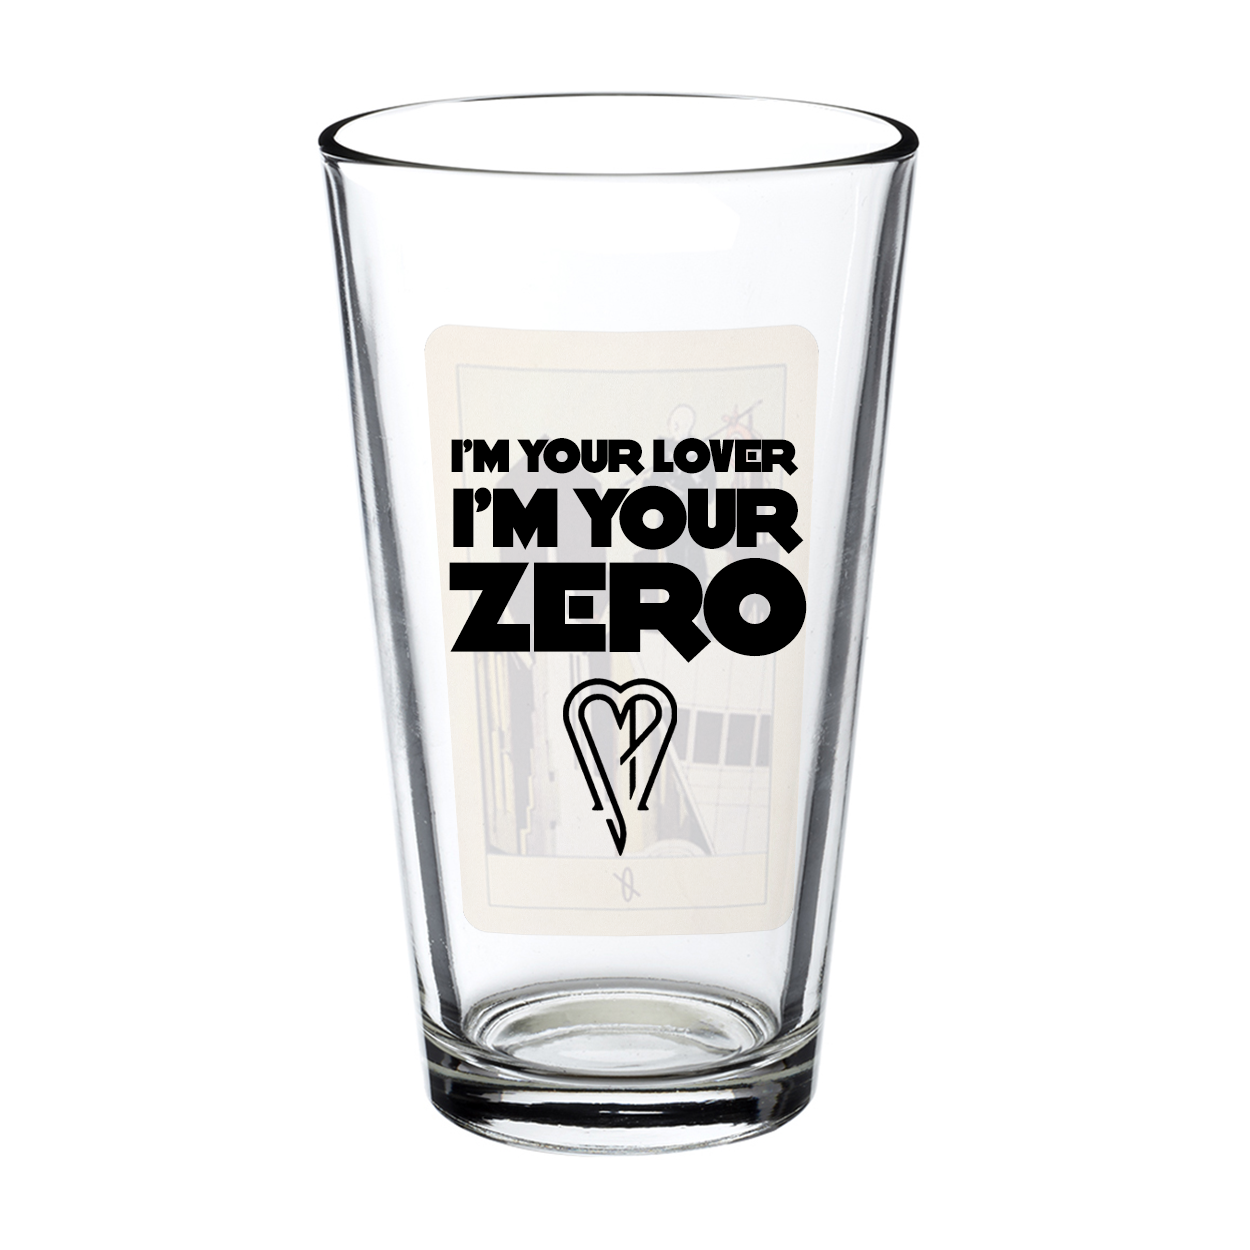 I'm Your Lover I'm Your Zero Glass